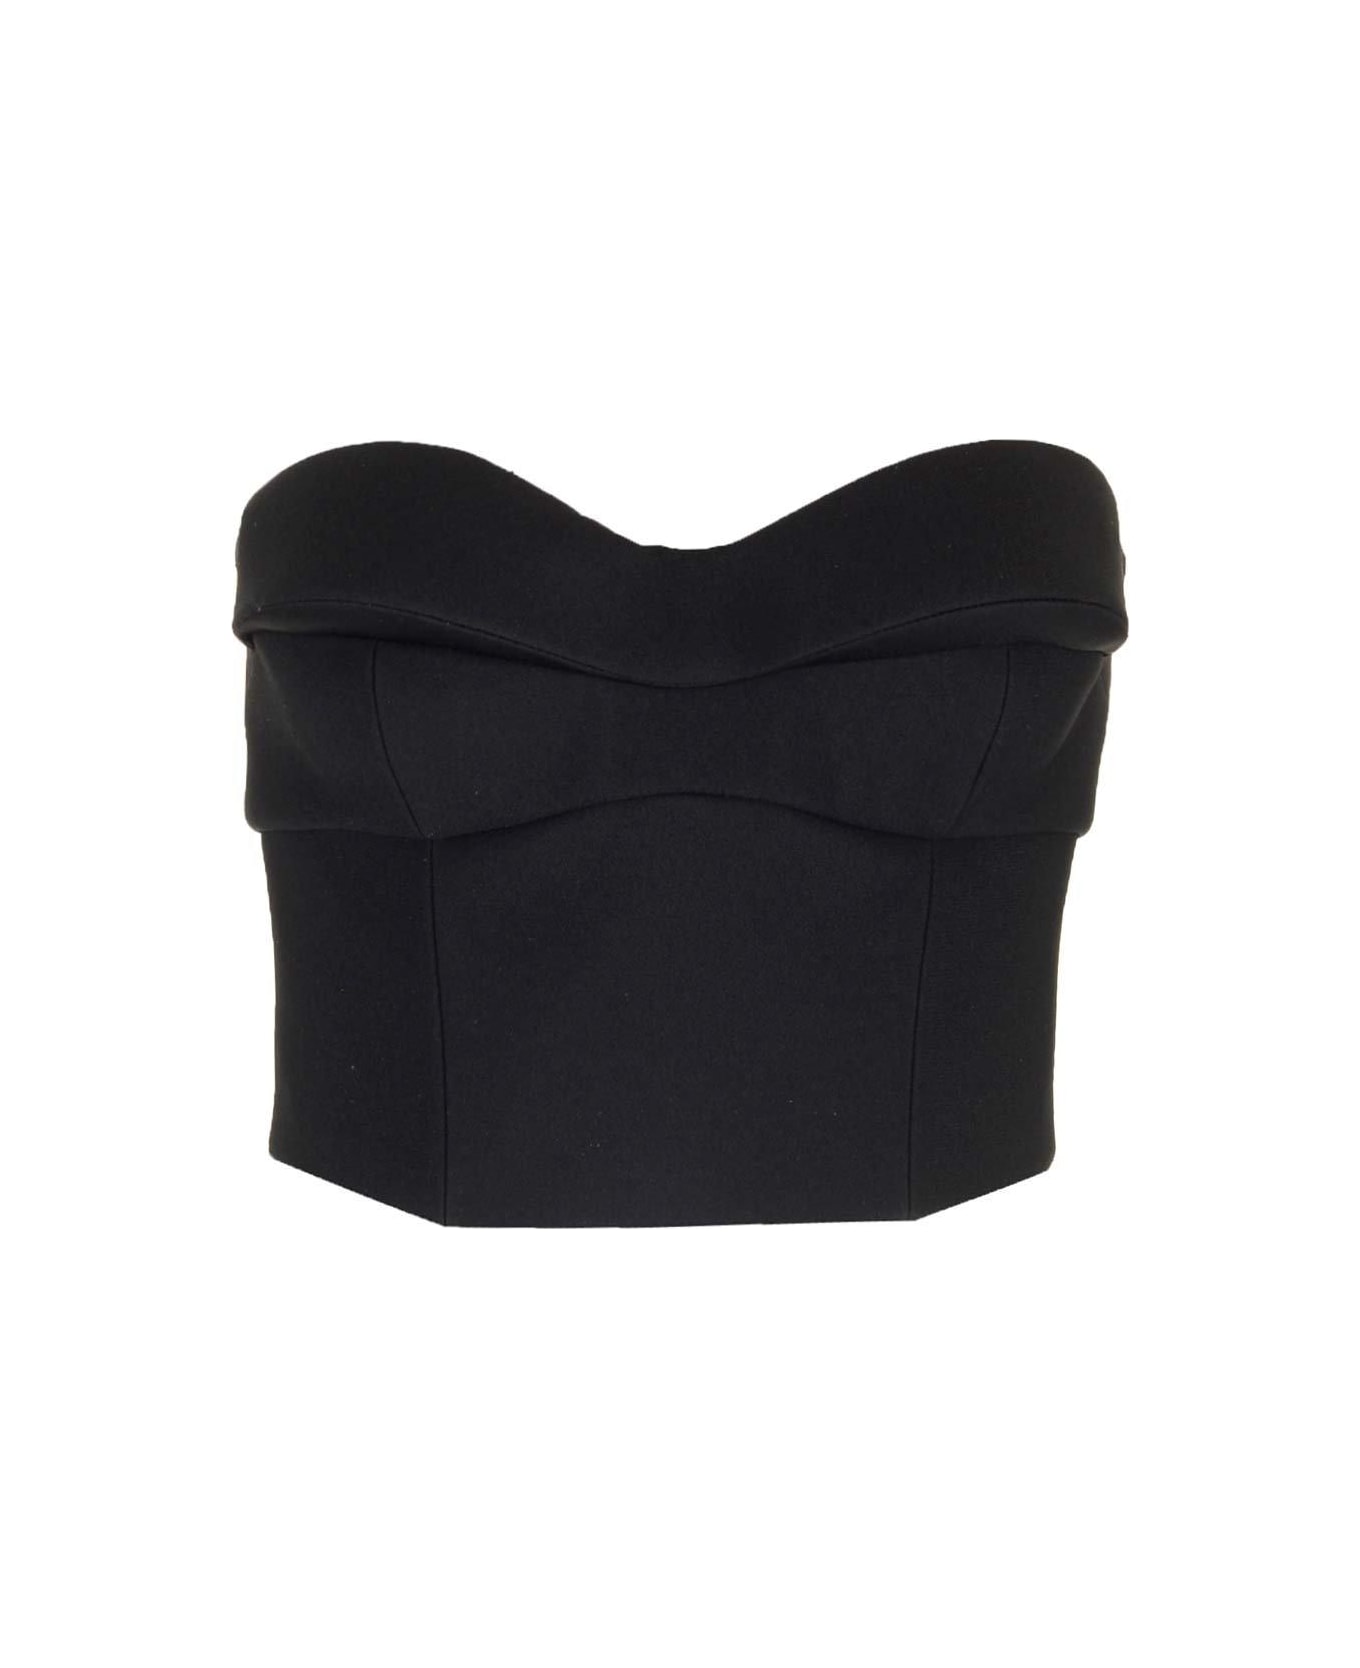 Versace Strapless Cropped Top - BLACK (Black)